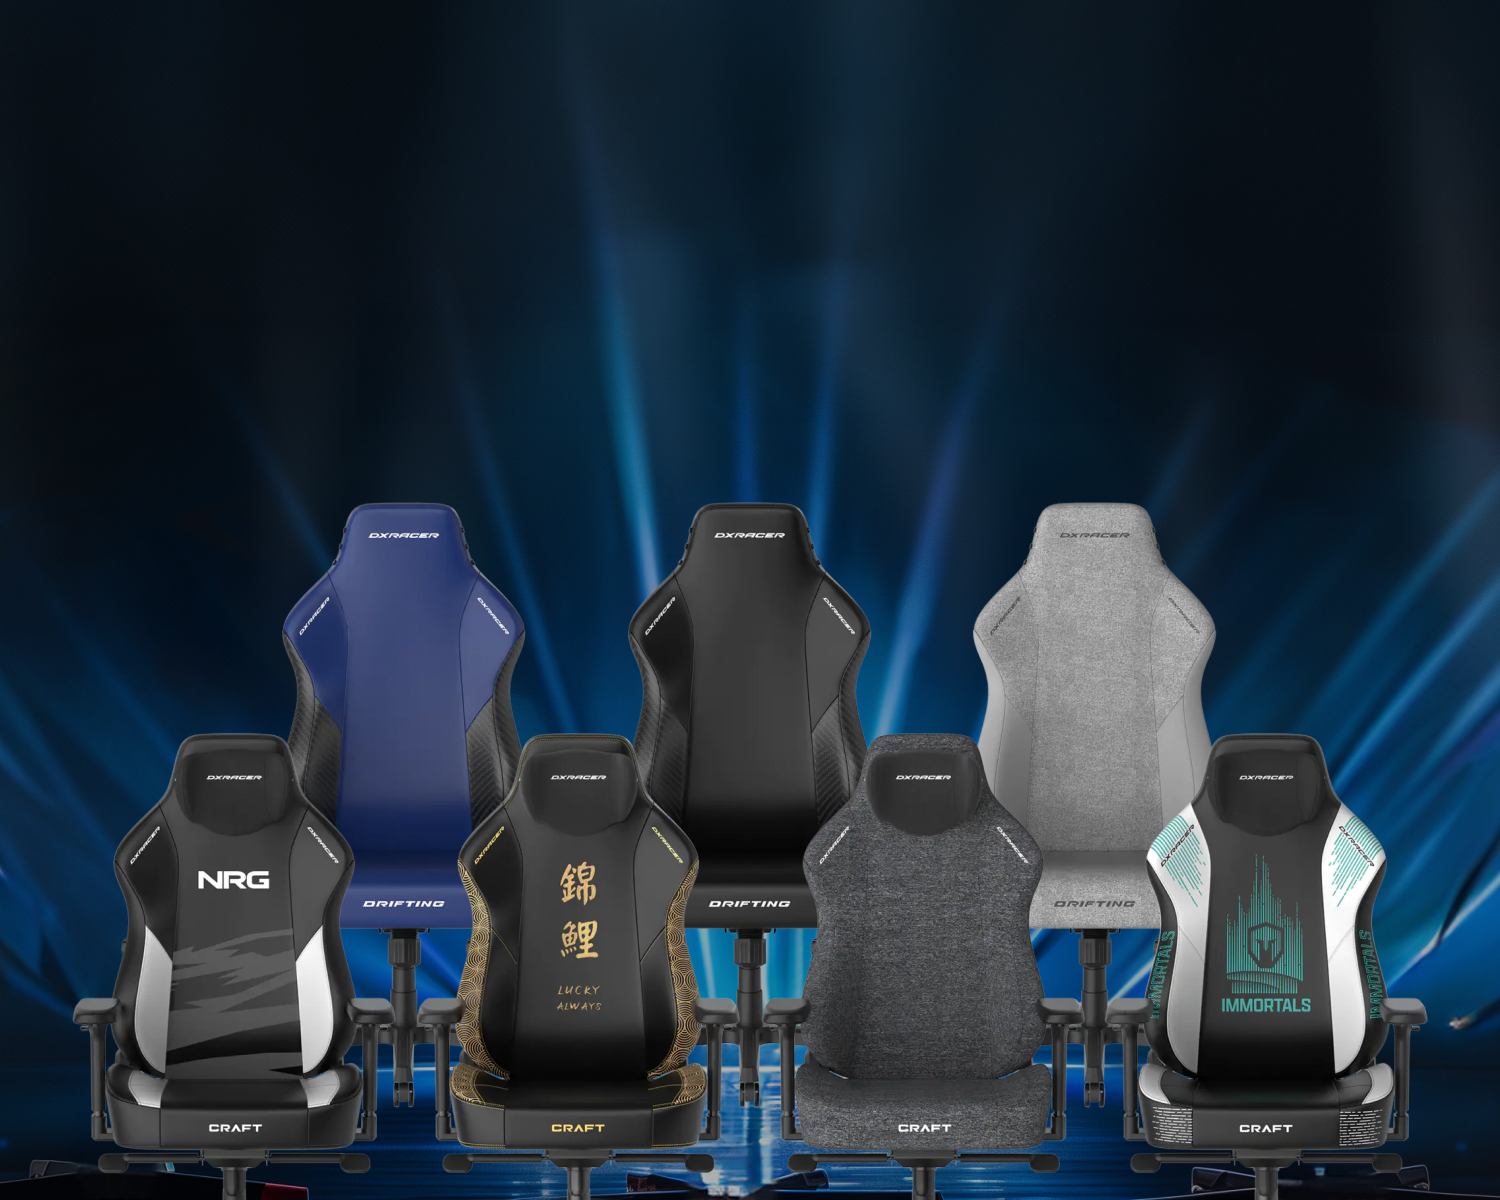 Shop All Gaming Chairs